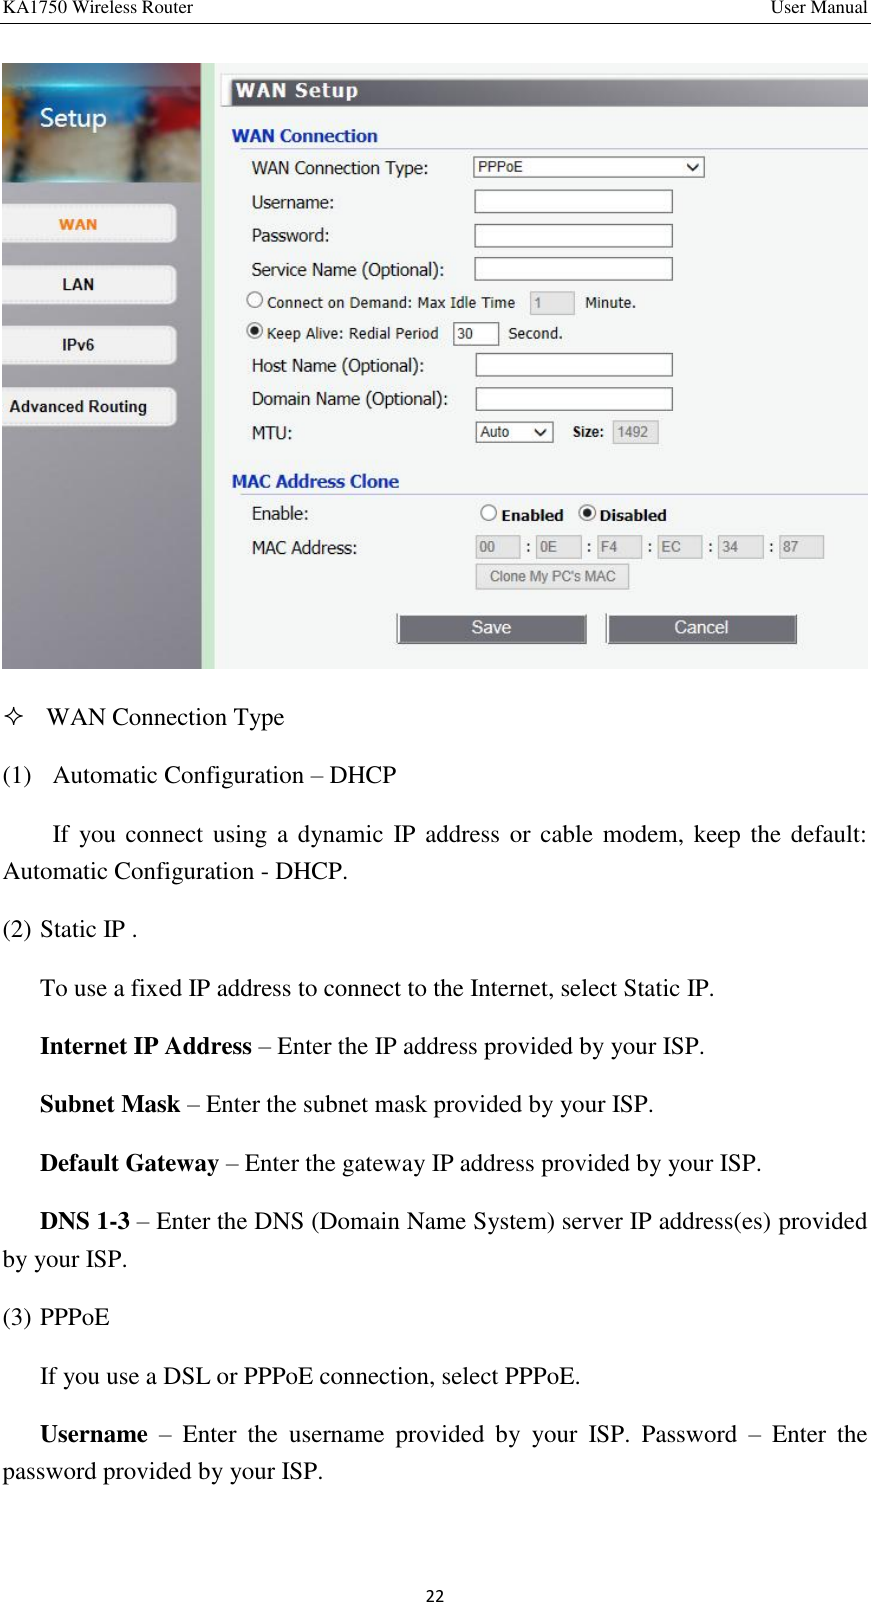 KA1750 Wireless Router       User Manual 22   WAN Connection Type (1)   Automatic Configuration – DHCP If you connect using  a  dynamic IP address  or cable modem, keep the default: Automatic Configuration - DHCP. (2) Static IP . To use a fixed IP address to connect to the Internet, select Static IP. Internet IP Address – Enter the IP address provided by your ISP. Subnet Mask – Enter the subnet mask provided by your ISP. Default Gateway – Enter the gateway IP address provided by your ISP. DNS 1-3 – Enter the DNS (Domain Name System) server IP address(es) provided by your ISP. (3) PPPoE   If you use a DSL or PPPoE connection, select PPPoE. Username –  Enter  the  username  provided  by  your  ISP.  Password  –  Enter  the password provided by your ISP. 